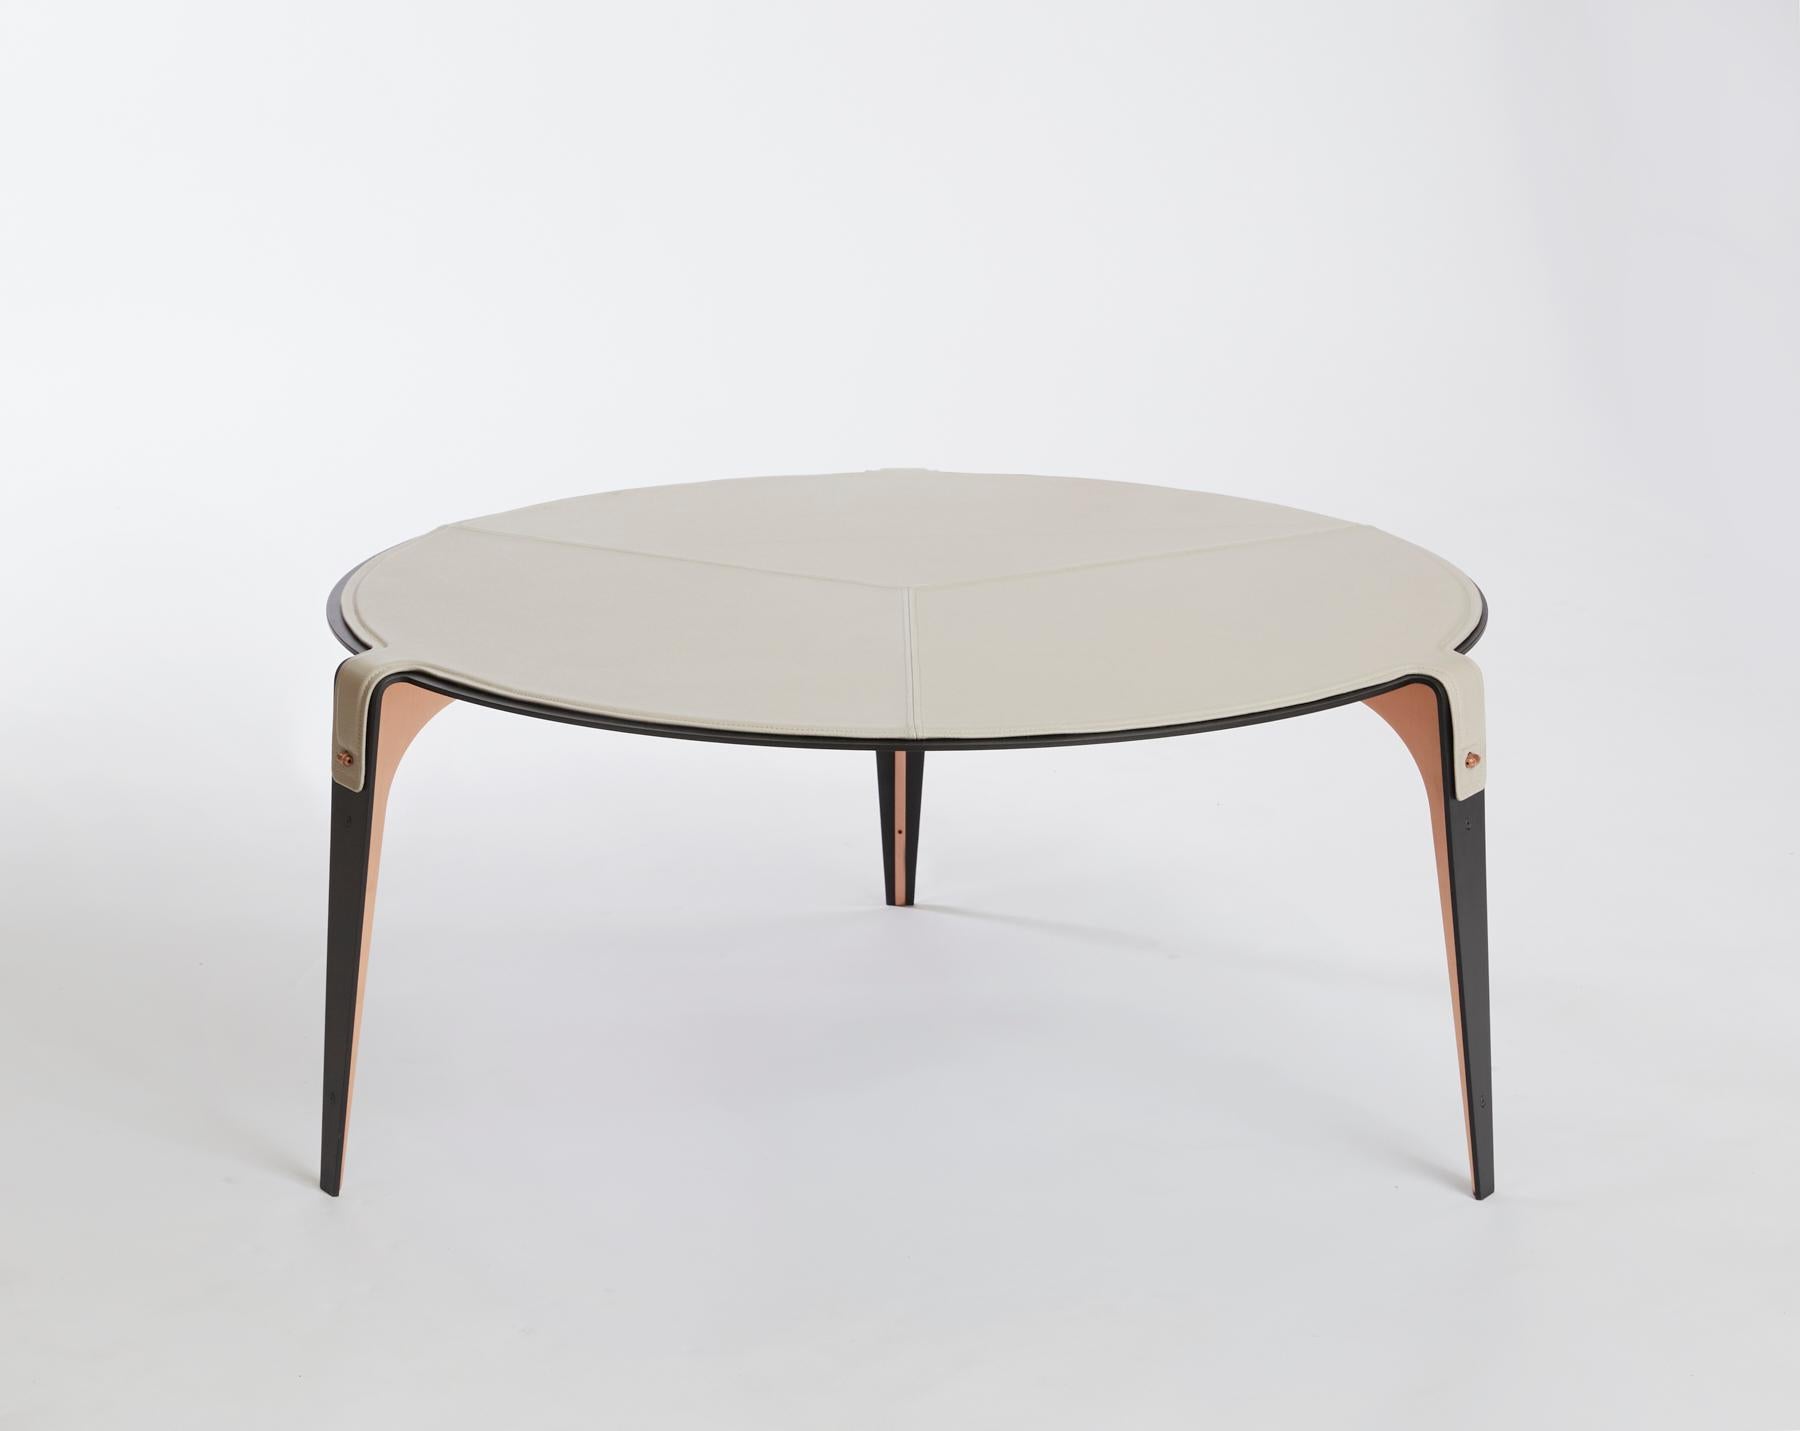 Pink (Nude Pink) Bardot Coffee Table with Leather Top and Satin Copper Hardware by Gabriel Scott 2